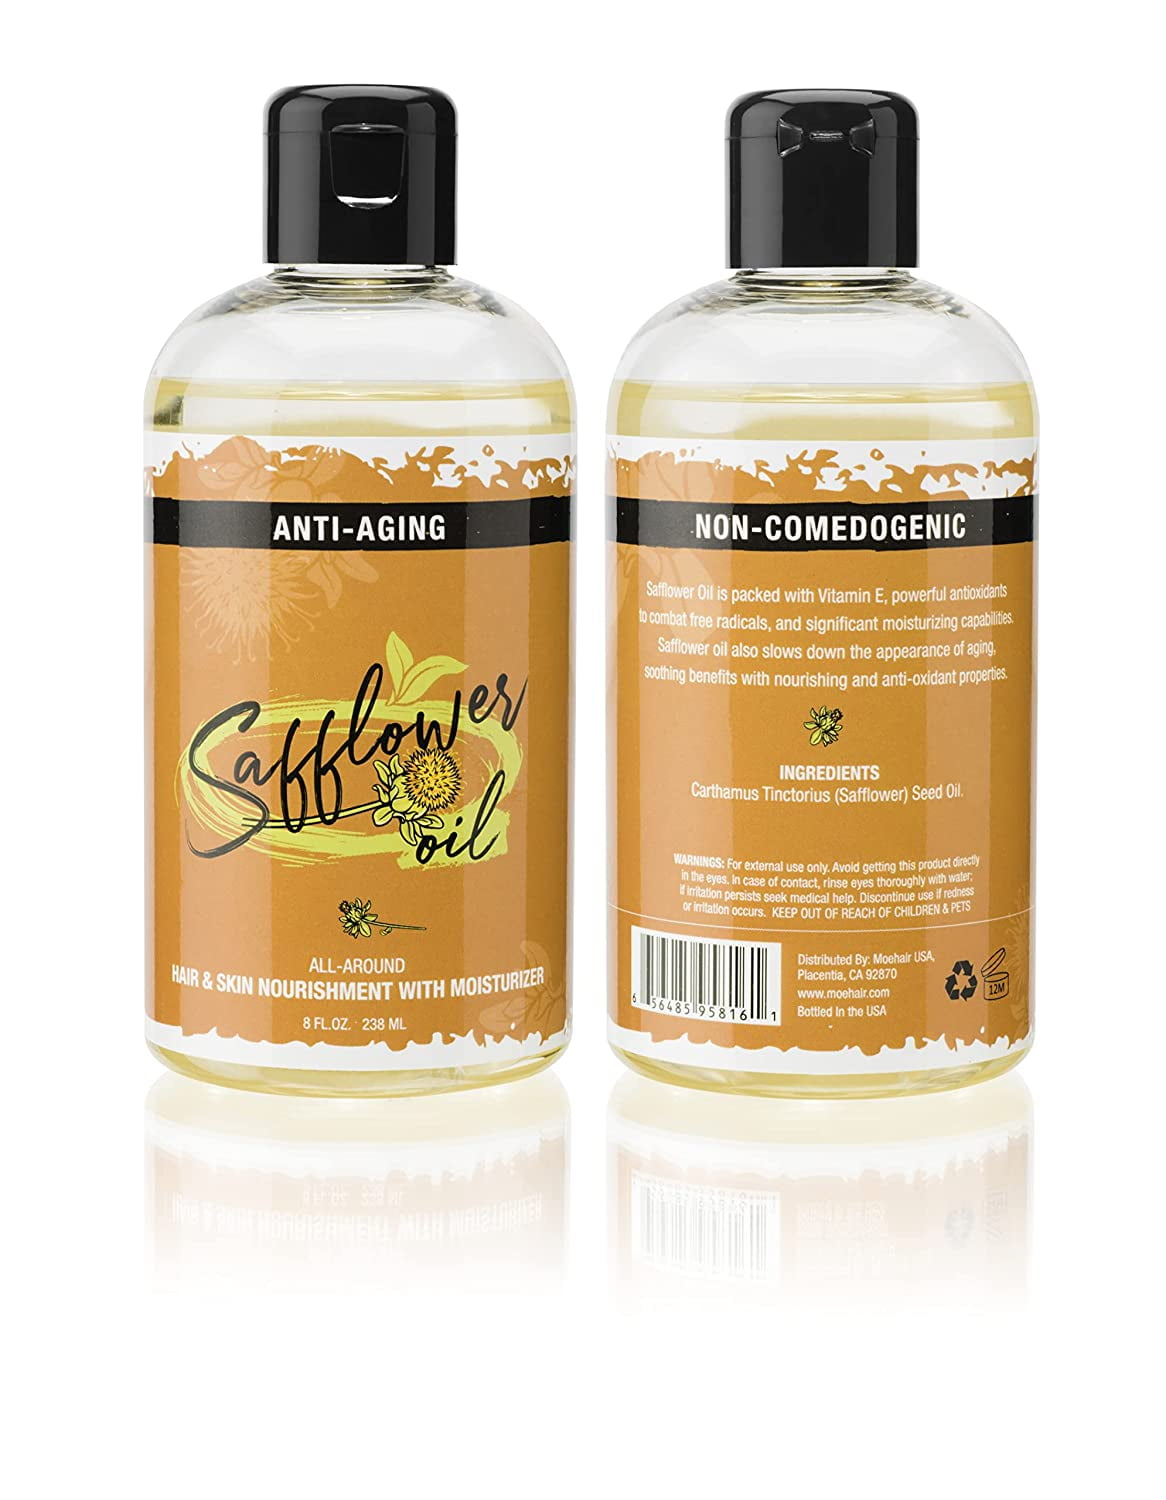 Safflower Oil by Moehair | Hair and Skin Nourishment with Moisturizer | Non- Comedogenic |Made in USA | 8 fl oz 